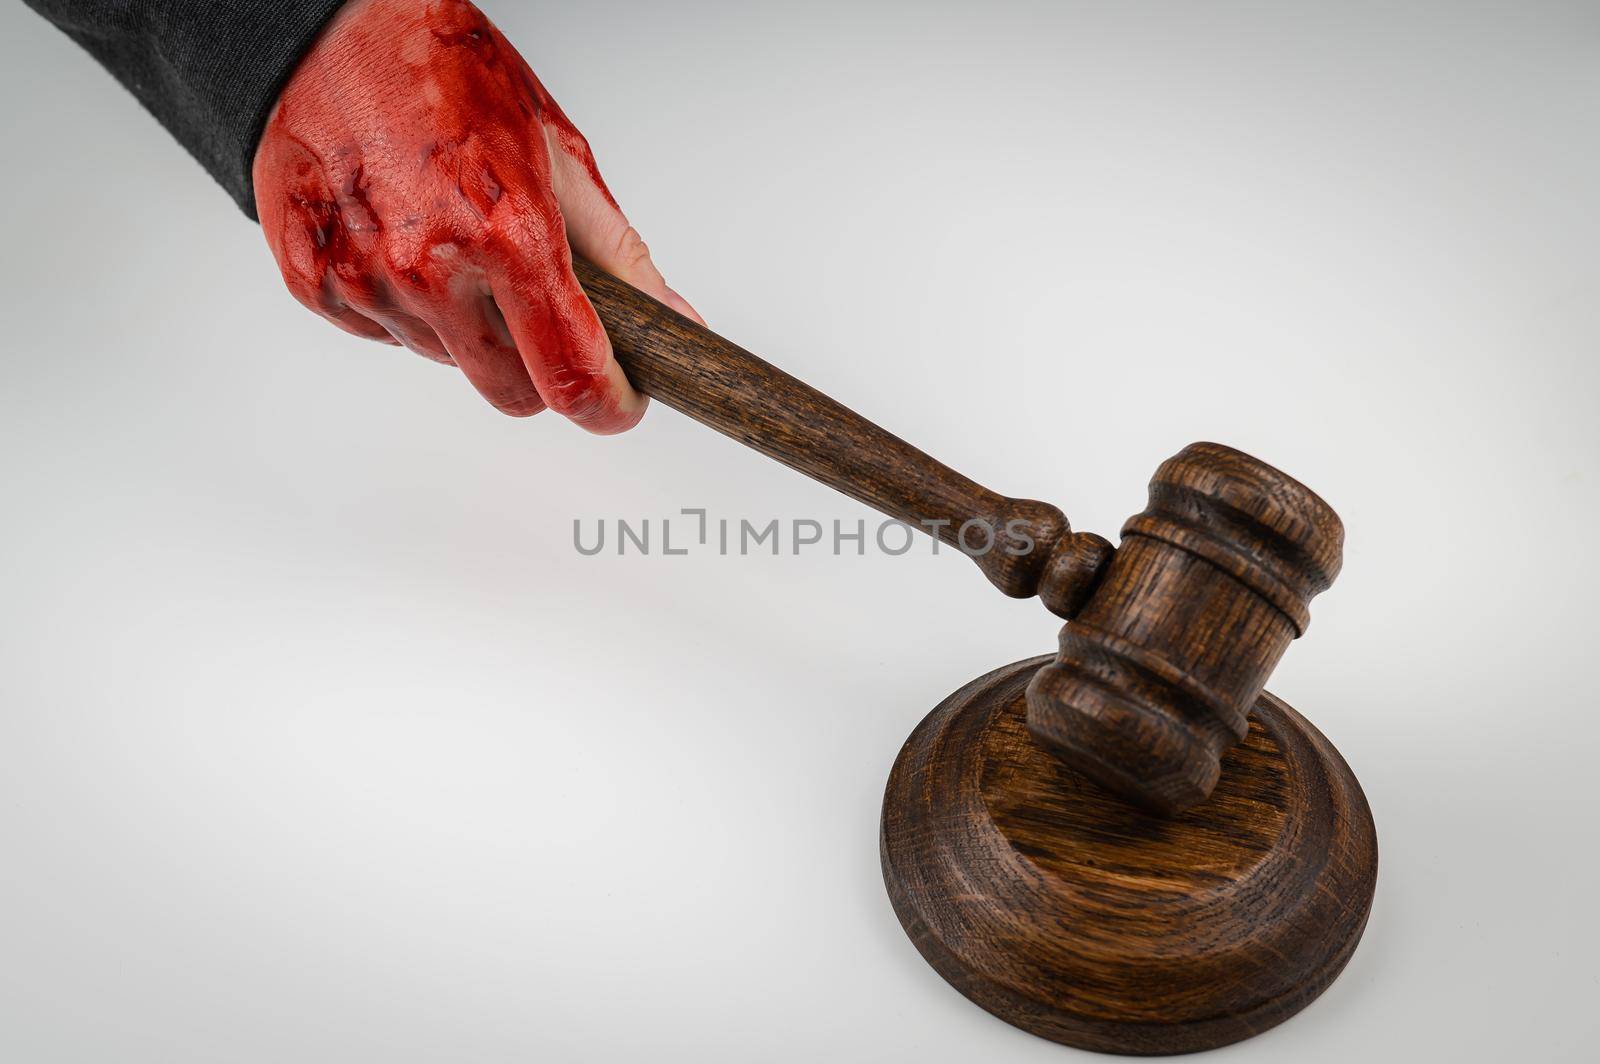 Female judge with bloody hands beats the gavel on a white background